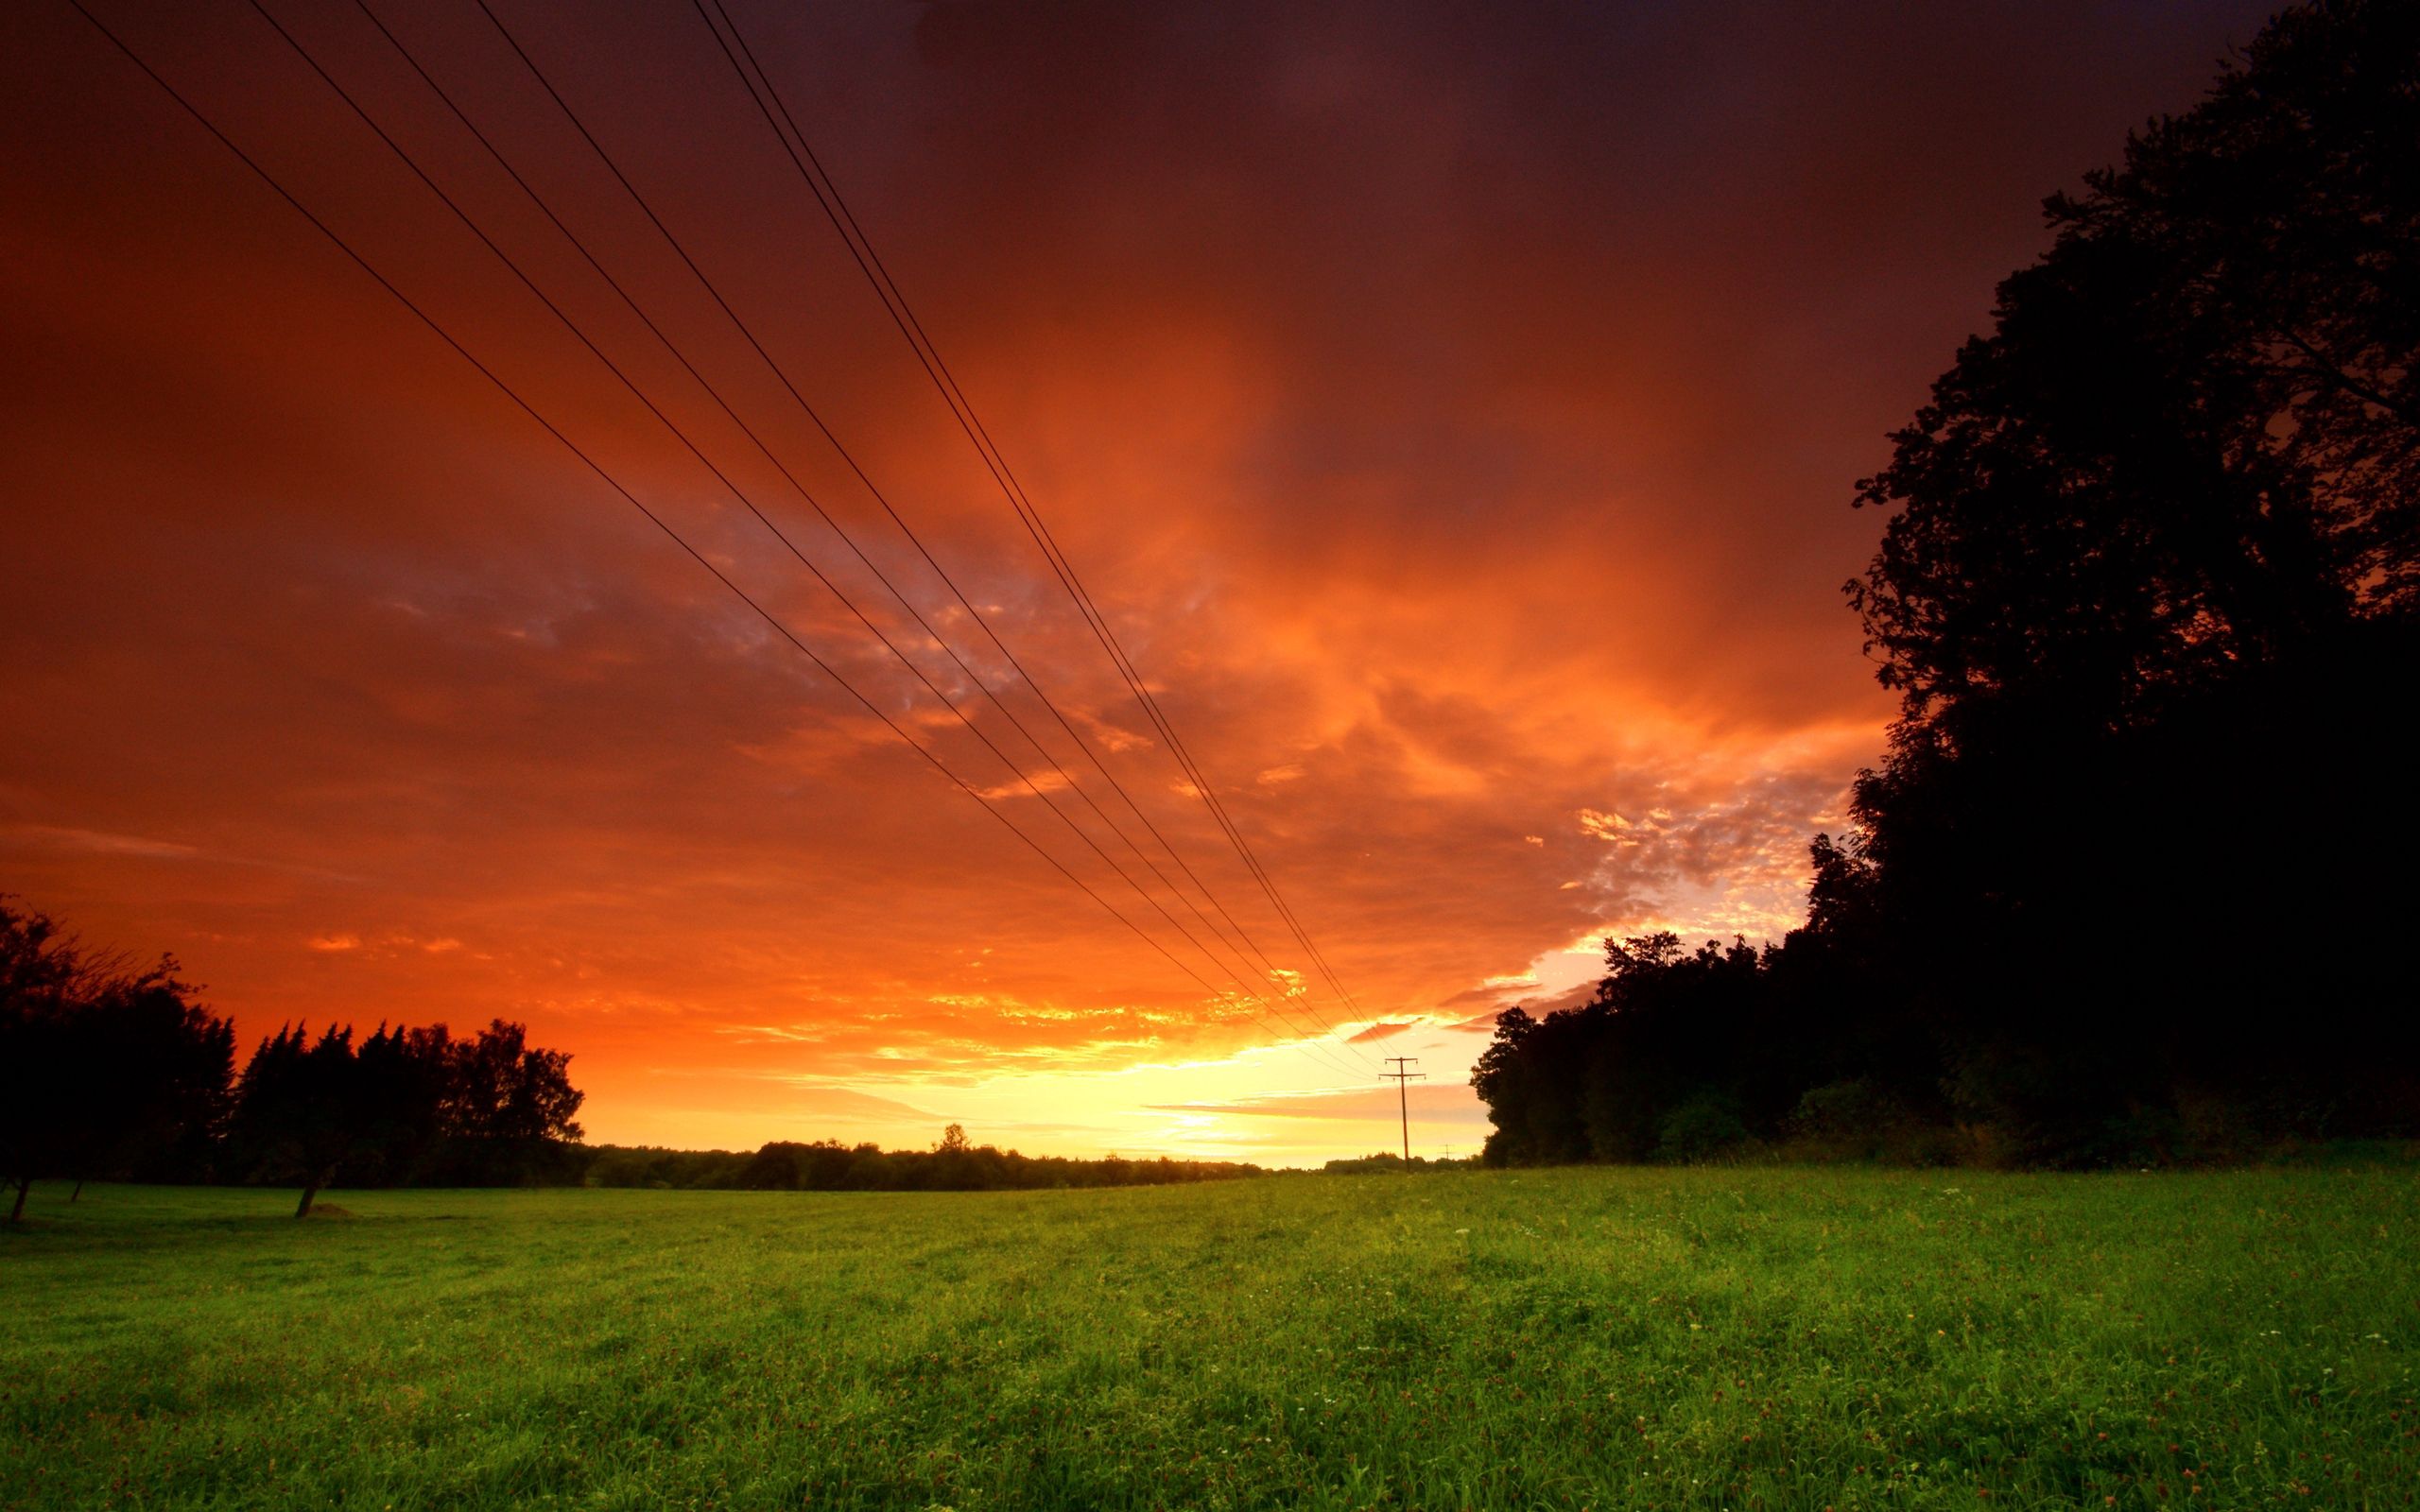 wires, wire, nature, sunset, sky, greens, field, evening